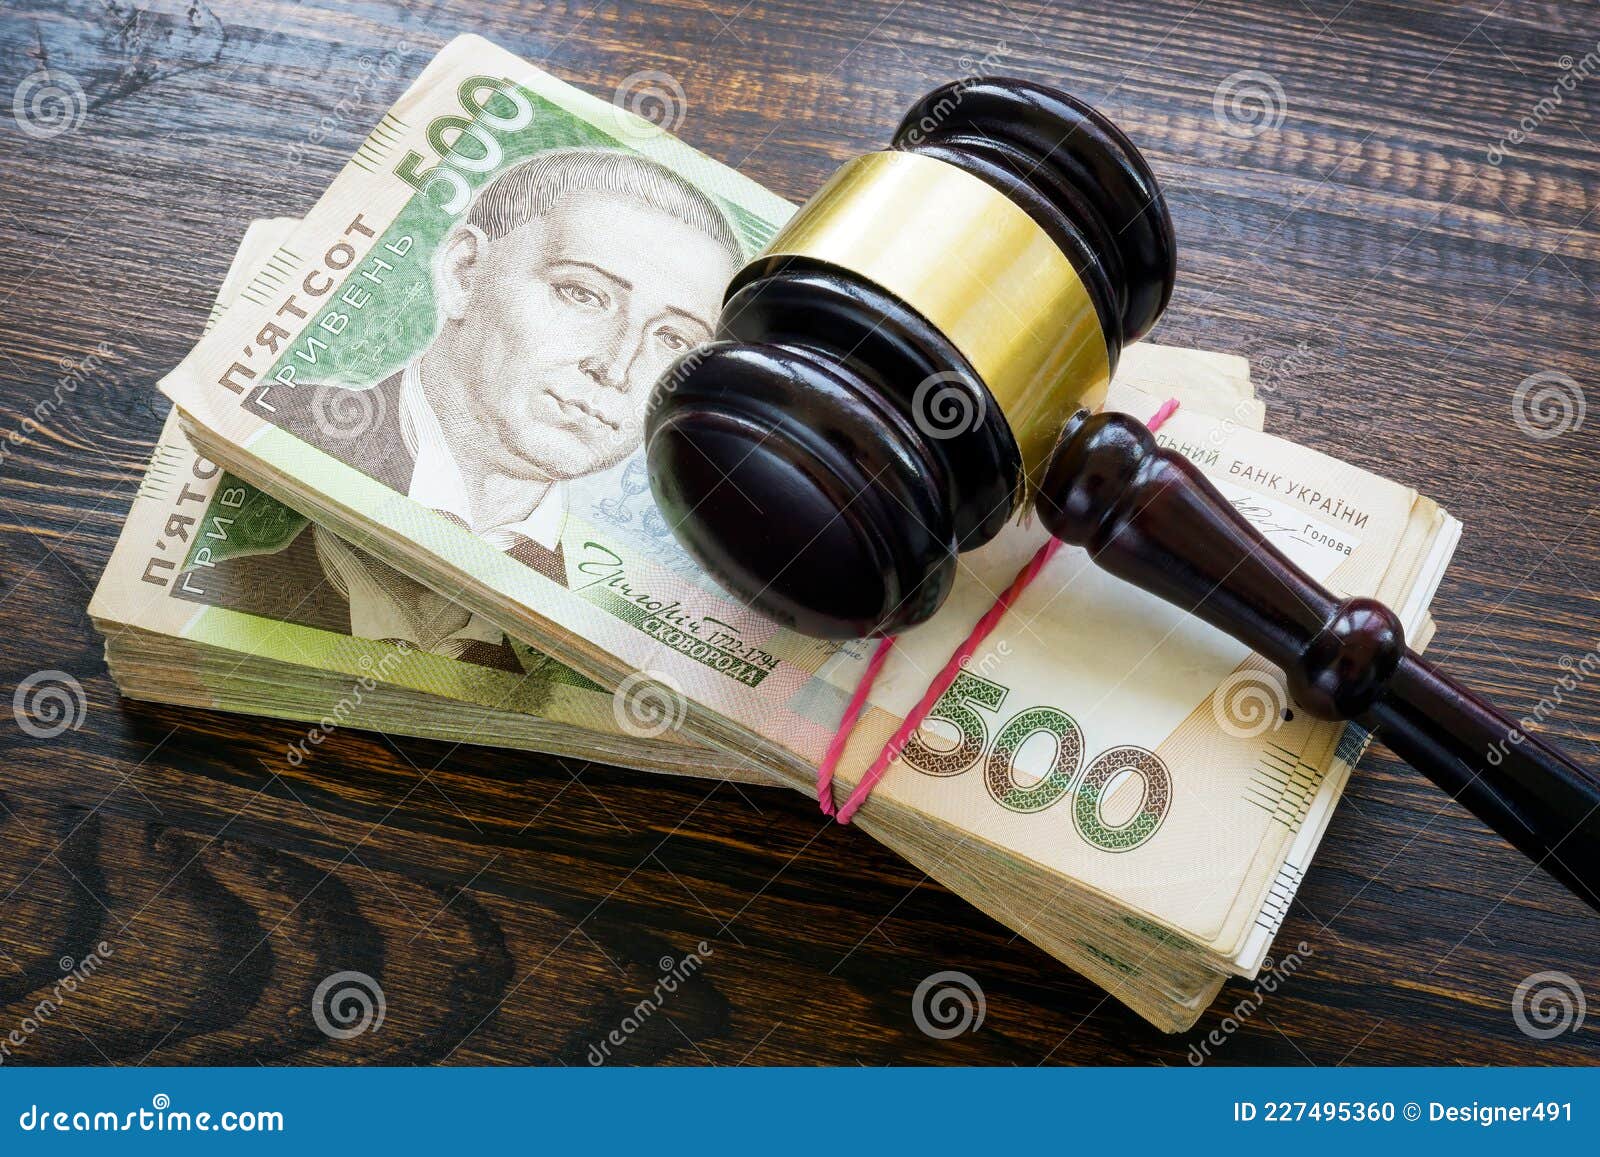 ukrainian hryvnia money and a gavel. bribery and corruption in court.